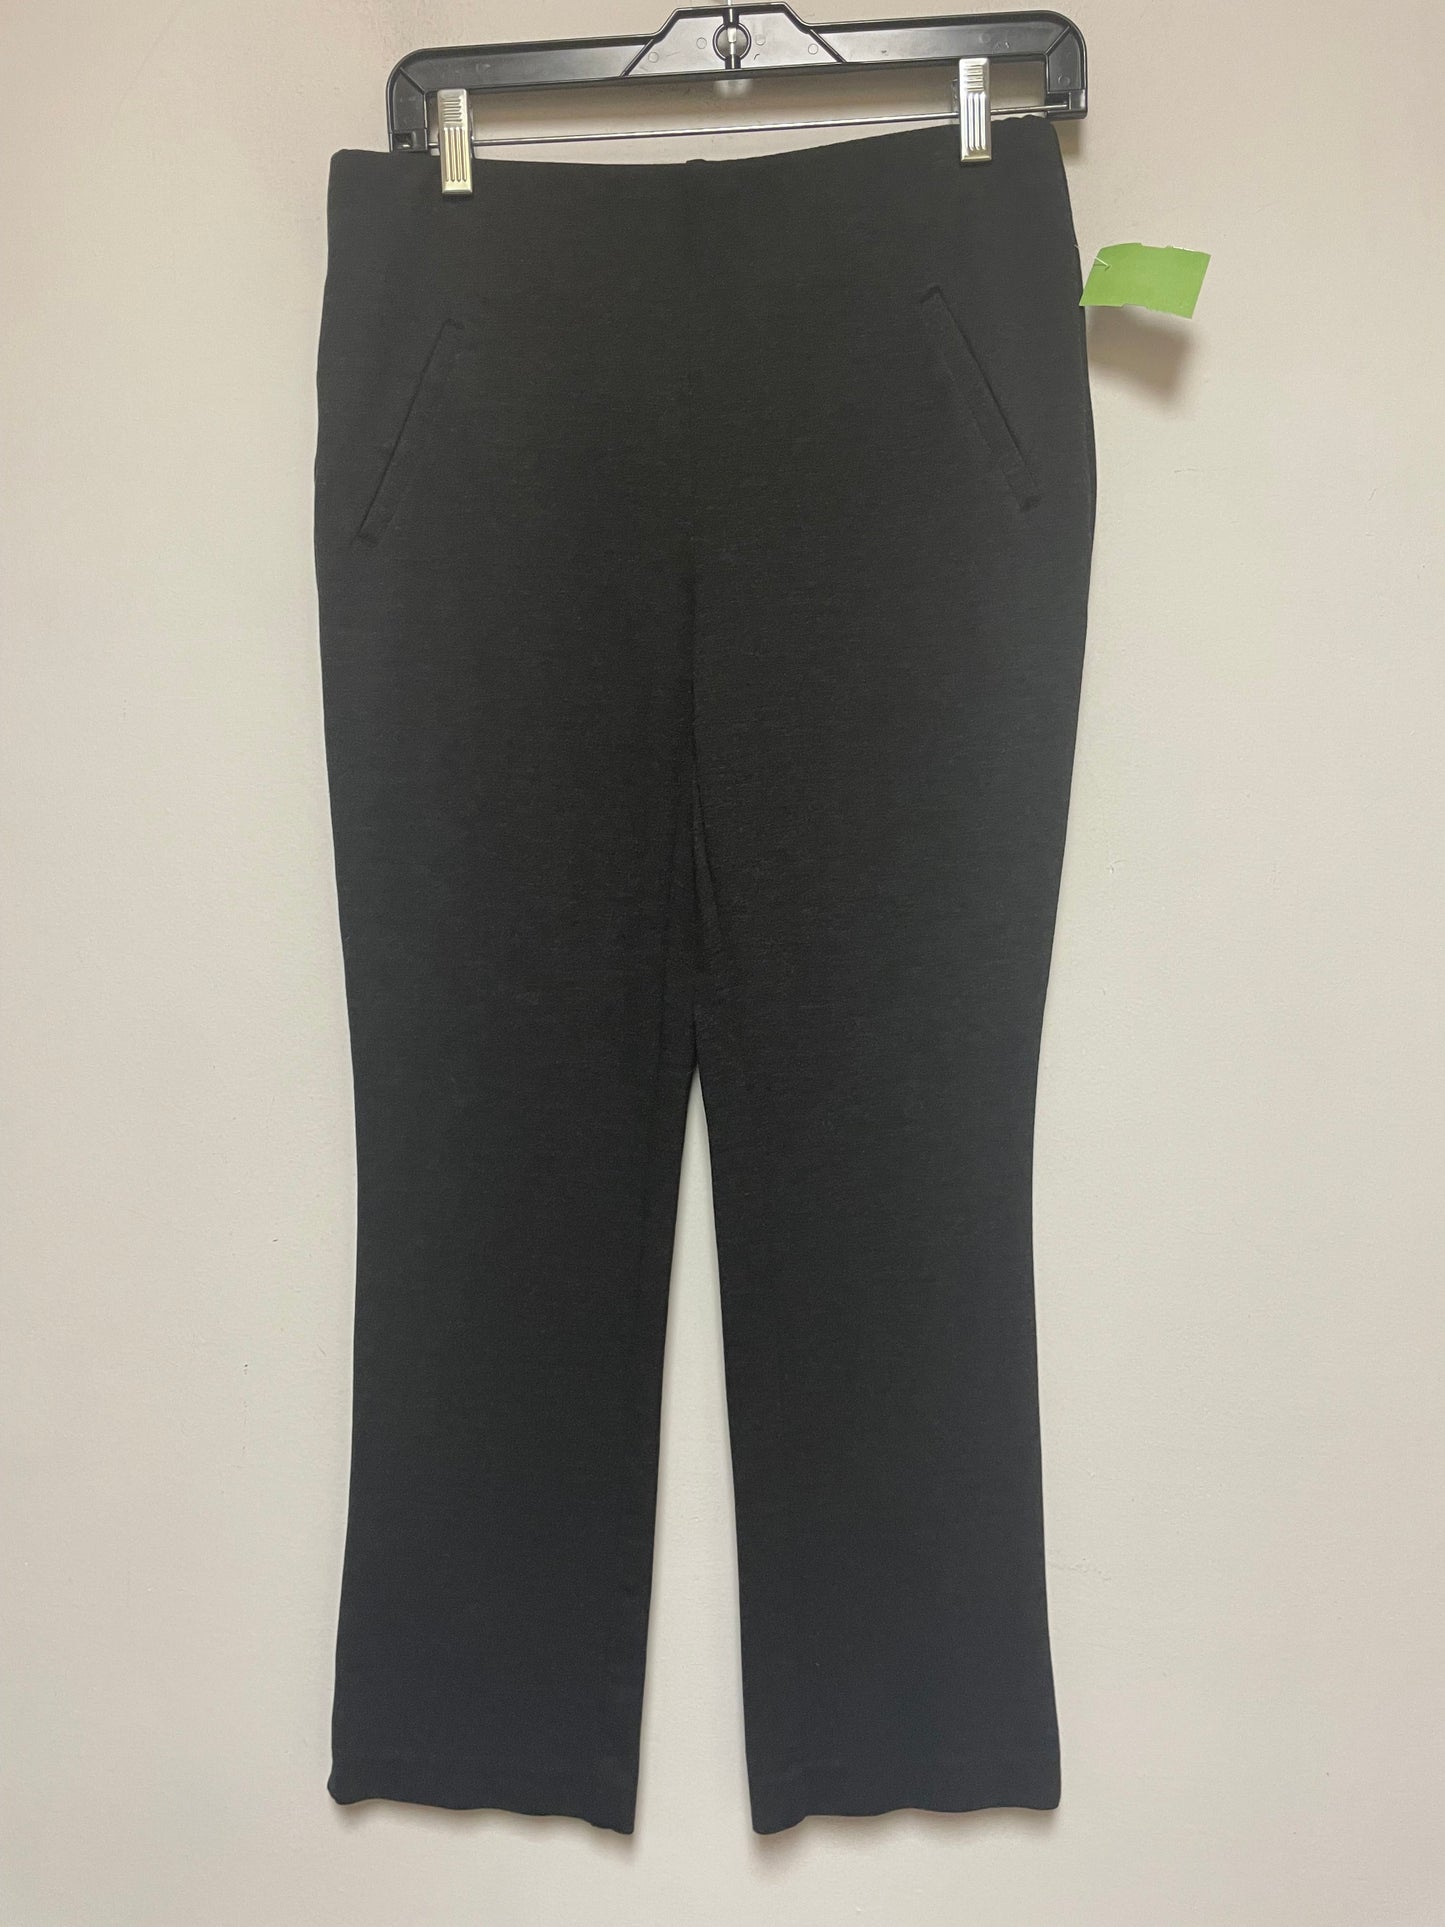 Pants Leggings By Chicos  Size: 2